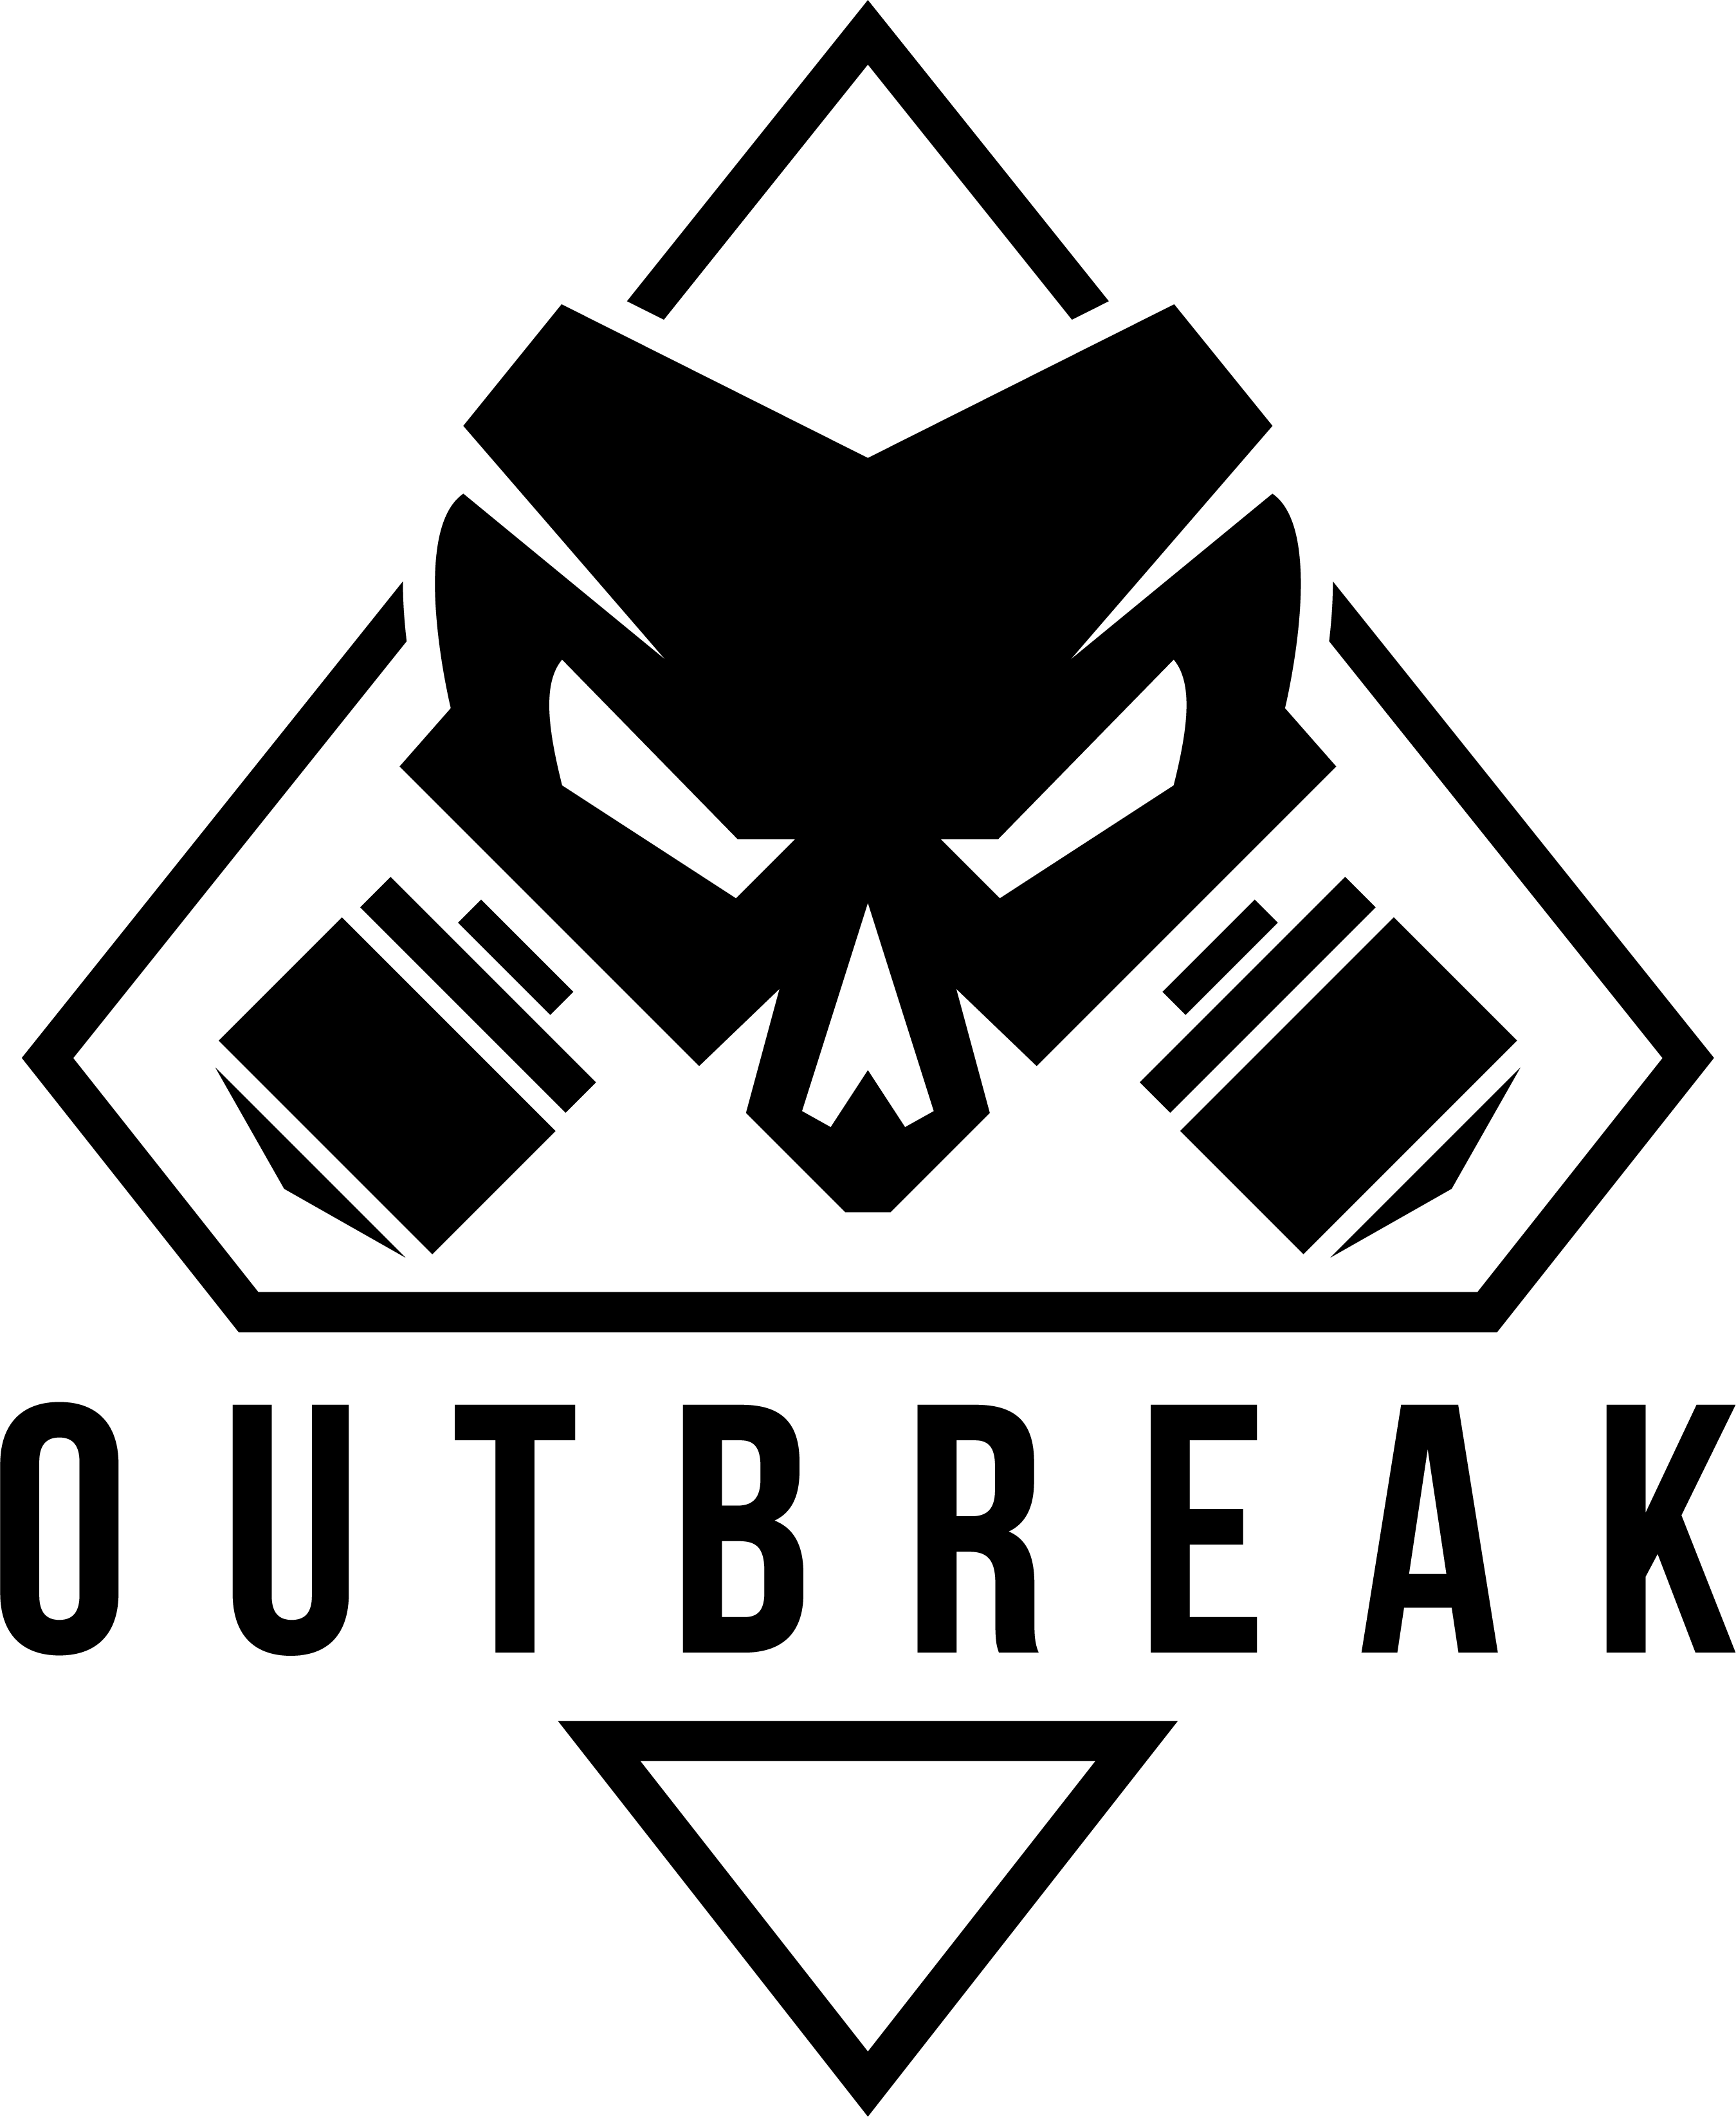 Operation Logo - Operation Outbreak Logo High-Res PNG : Rainbow6